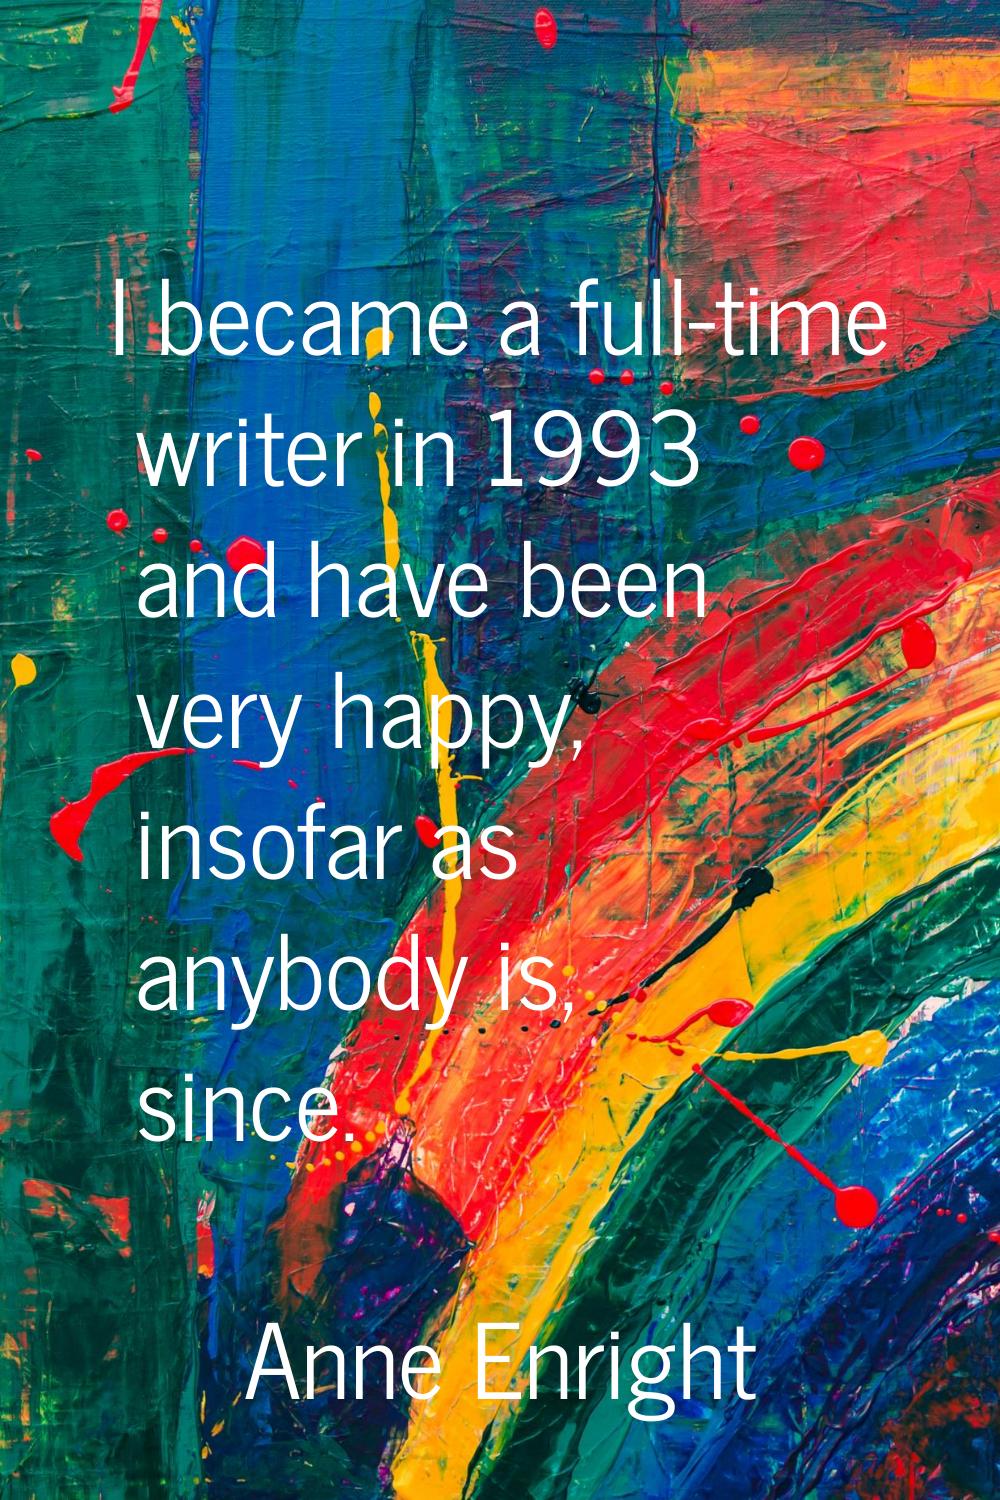 I became a full-time writer in 1993 and have been very happy, insofar as anybody is, since.